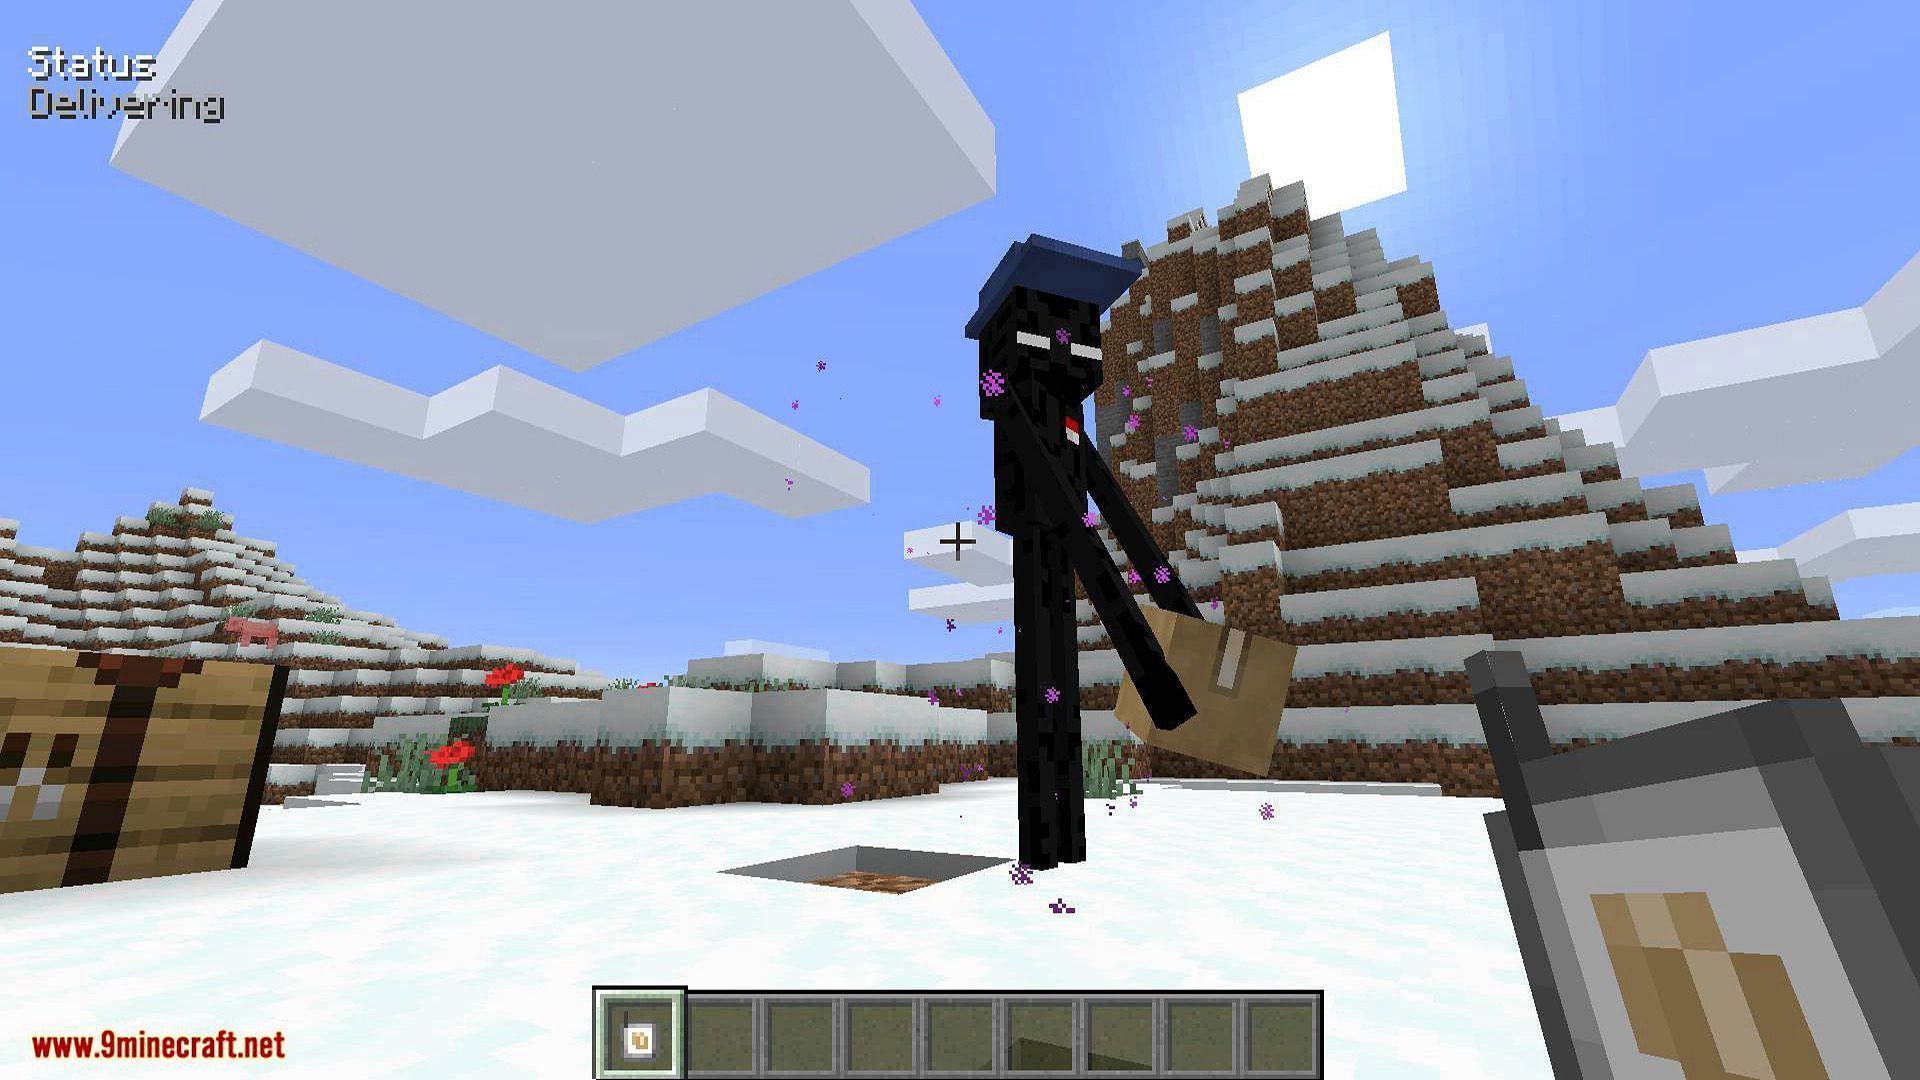 Deliver mail or receive it through the Ender Mail Man (Image via planetminecraft.net)